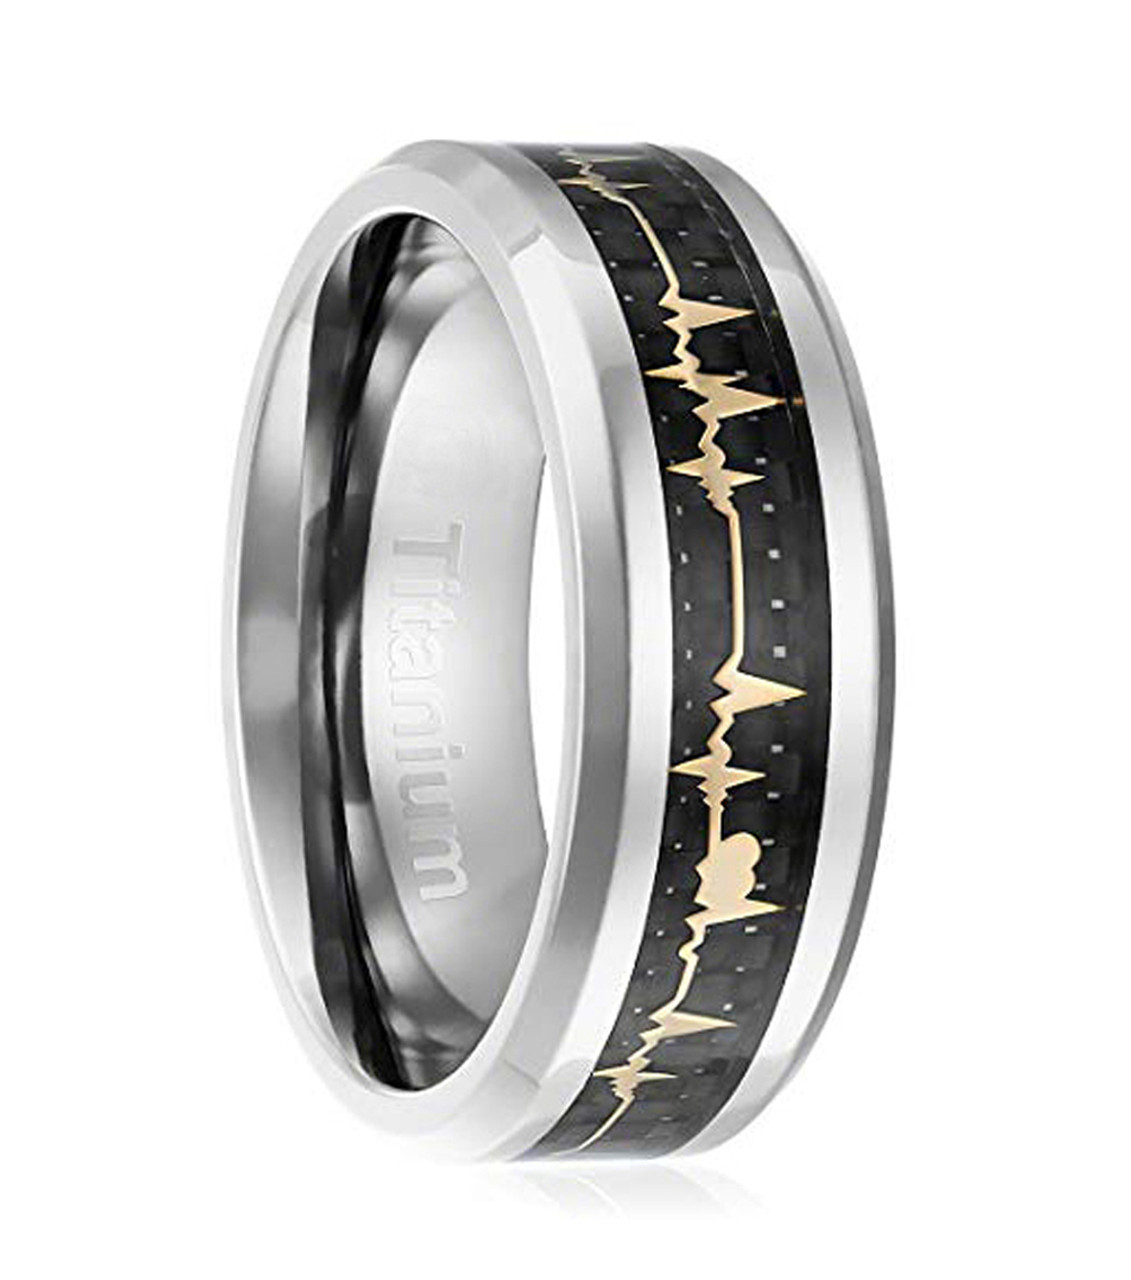 Unisex or Men's Titanium EKG Heartbeat Wedding Band (8mm). Silver Band with Gold Inlay Heart Life-line on Black Carbon Fiber. Light Weight Titanium Comfort Fit Love Ring